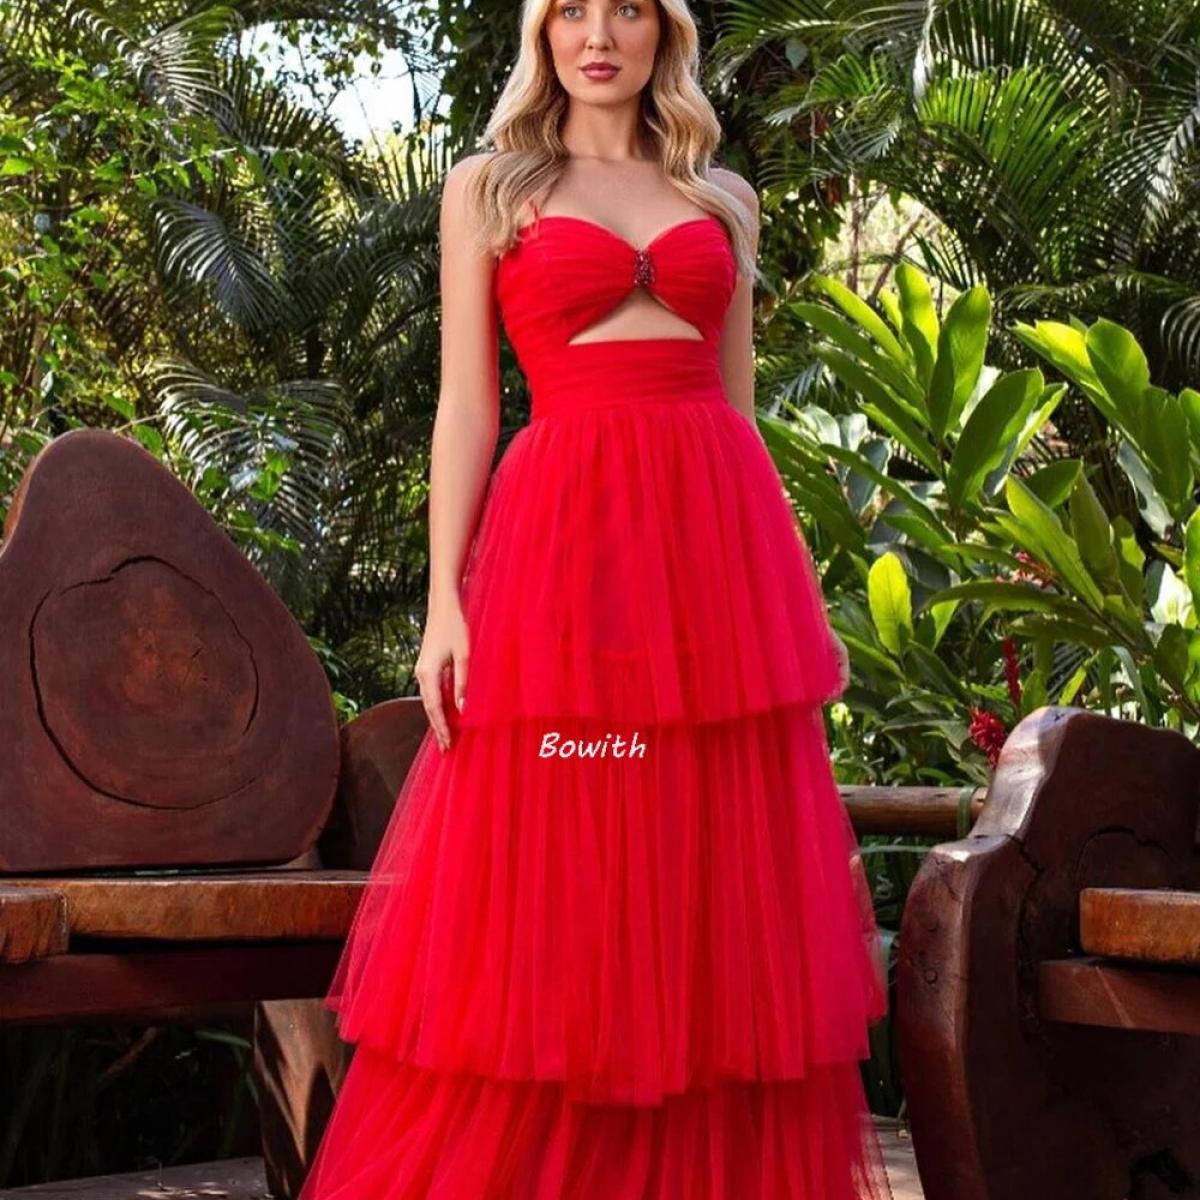 Sweetheart Evening Party Dress Luxury Dress For Gala Party 2022 Tiered Prom Dress Women's Elegant Party Dresses Vestidos